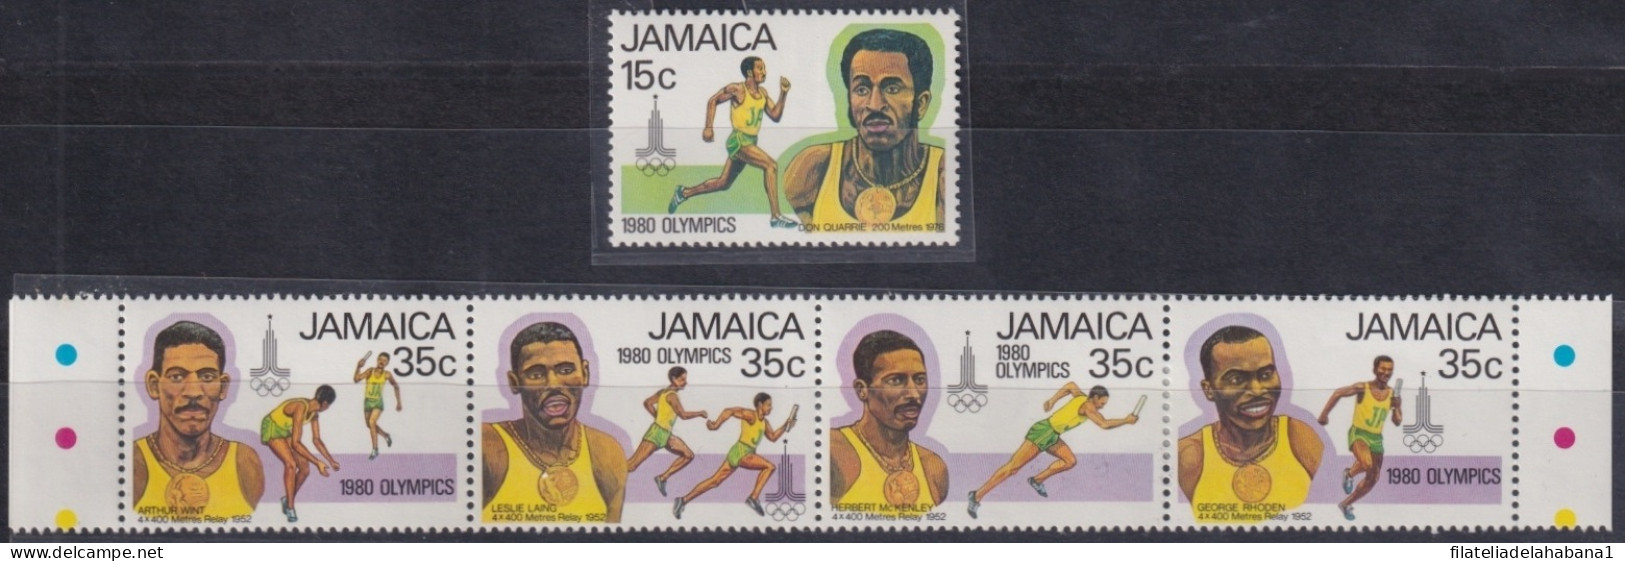 F-EX50105 JAMAICA MNH 1980 MOSCOW OLYMPIC GAMES ATHLETICS ATLETISMO.                      - Zomer 1980: Moskou